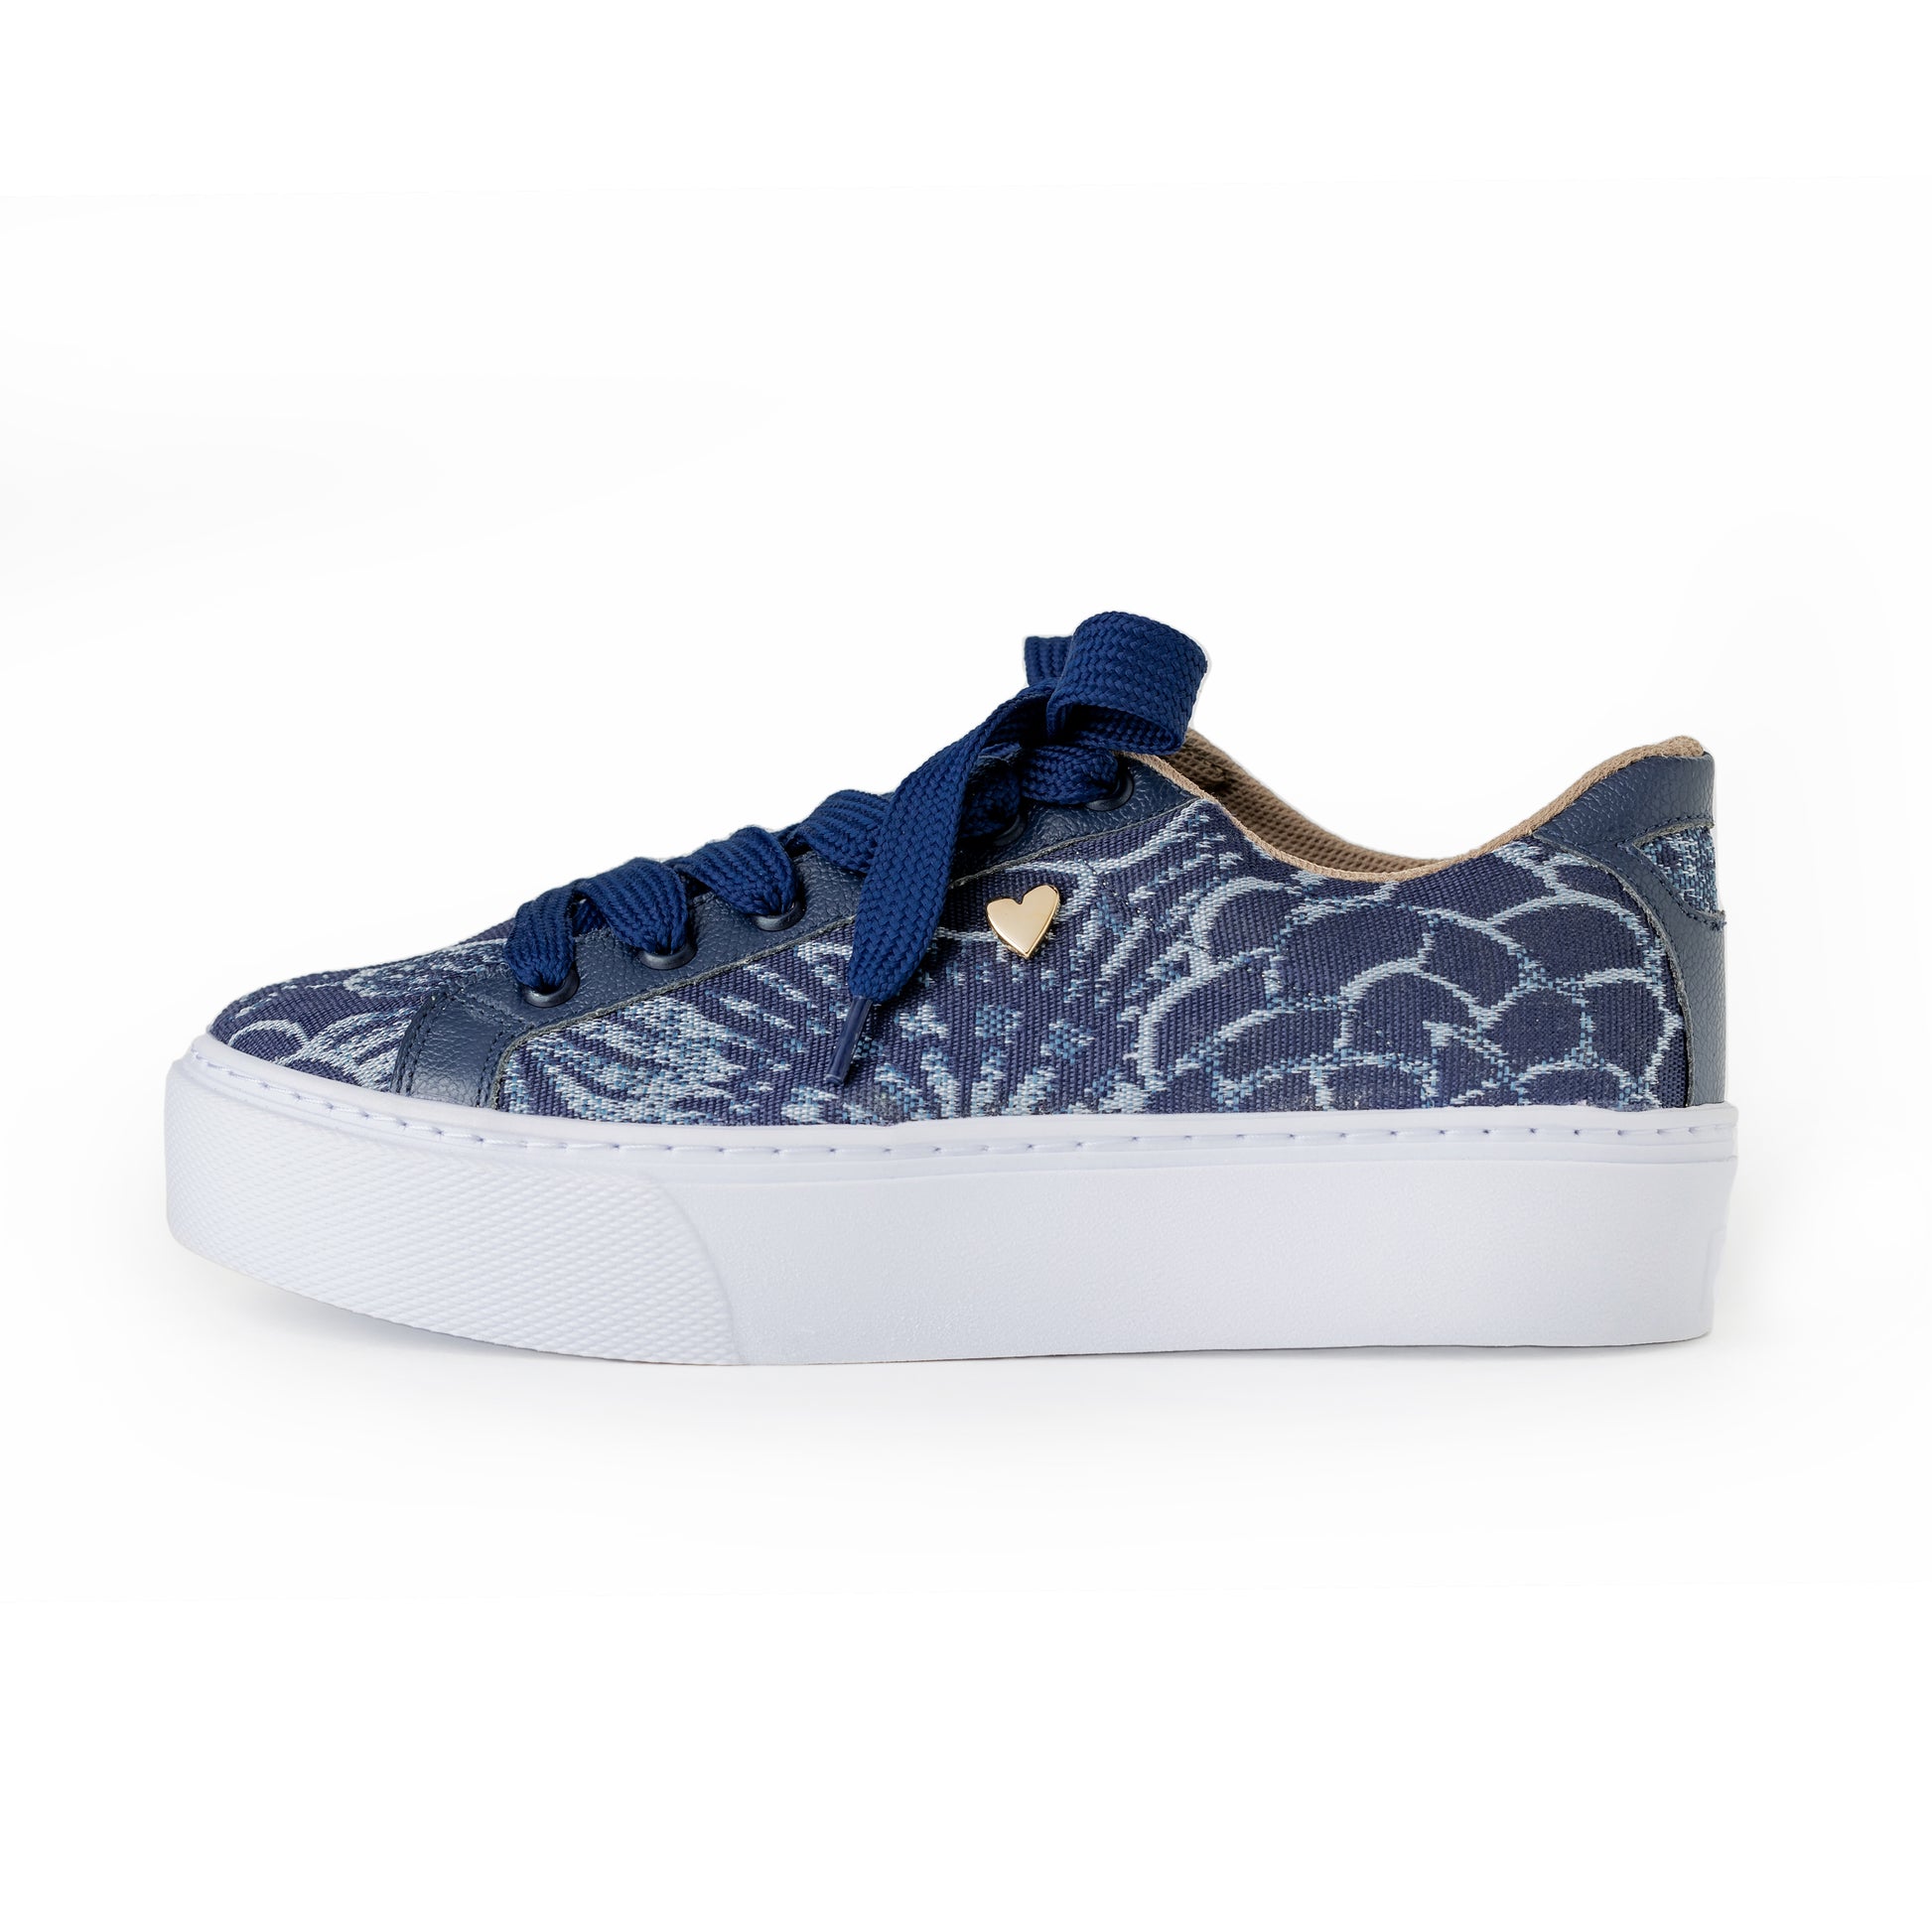 Our classic CARMINA sneakers design but now renewed with a blue floral print, ready to be part of your collection. It was inspired by women who need to feel comfortable in their days. FEATURES Fabric upper material Genuine leather insole lining Rubber platform lining American sizes Flexible rubber outsole Handcrafted 1.5 inch heel height 1 inch platform